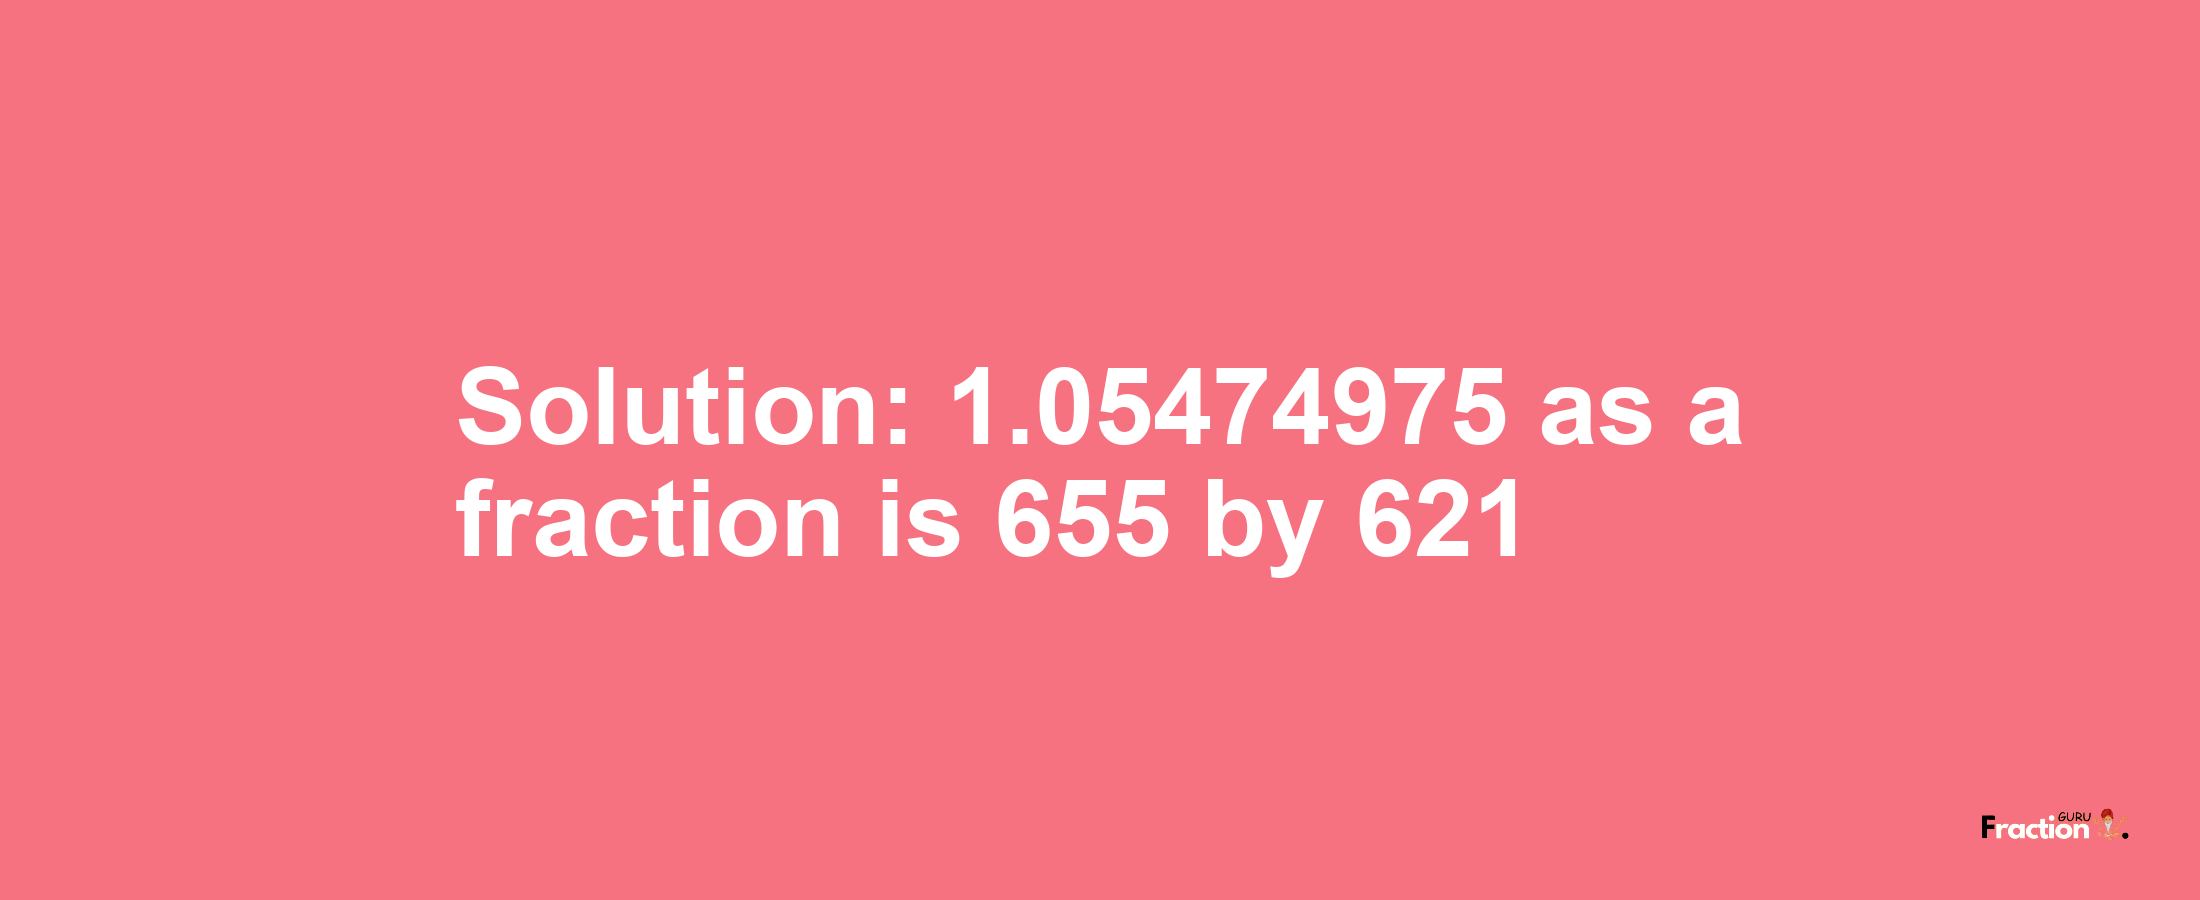 Solution:1.05474975 as a fraction is 655/621